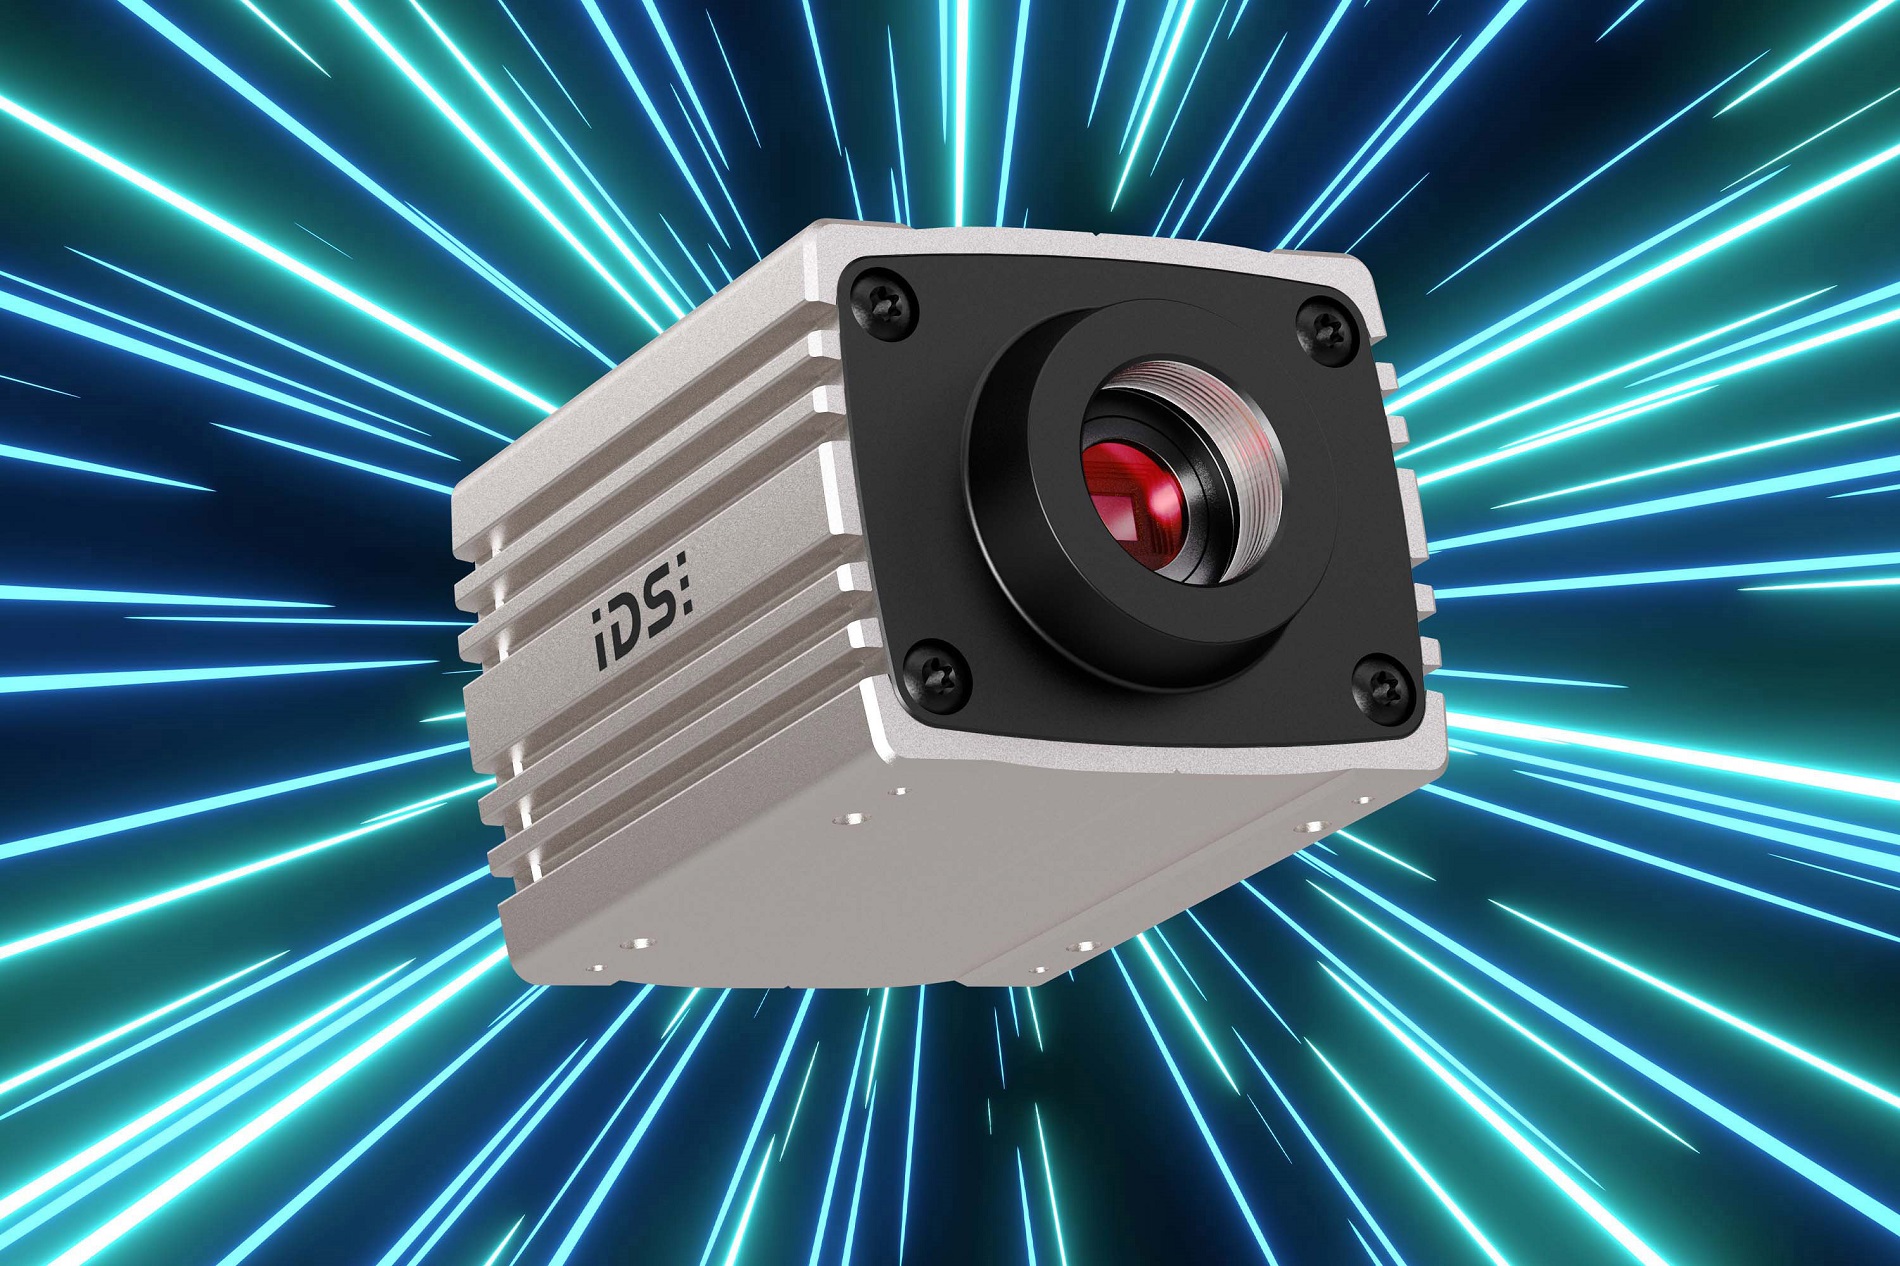 With uEye Warp10, IDS launches ultra-fast 10GigE industrial cameras